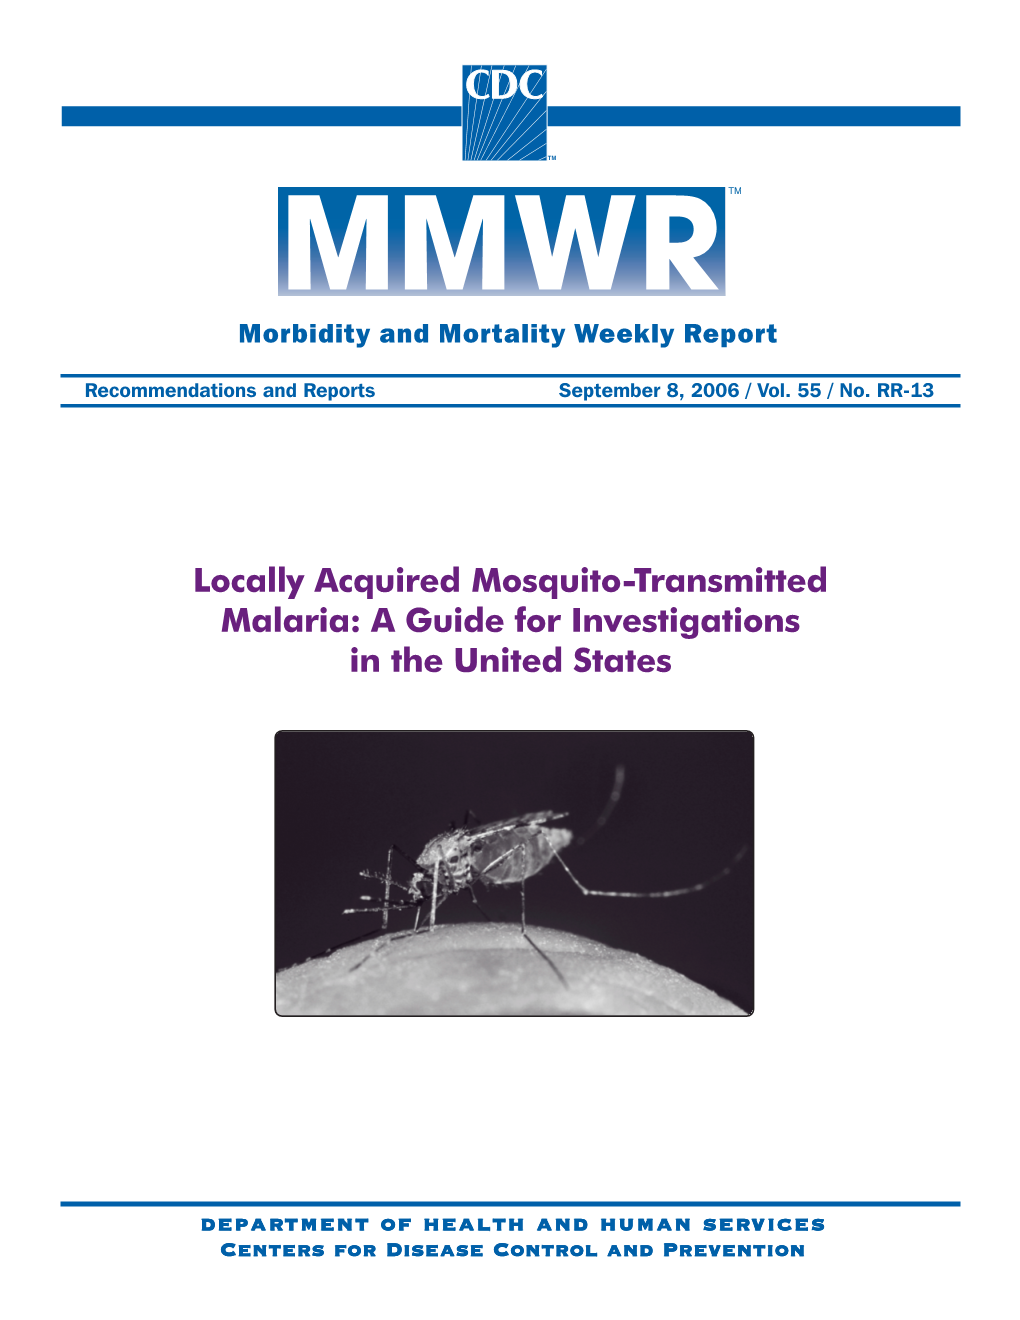 Locally Acquired Mosquito-Transmitted Malaria: a Guide for Investigations in the United States